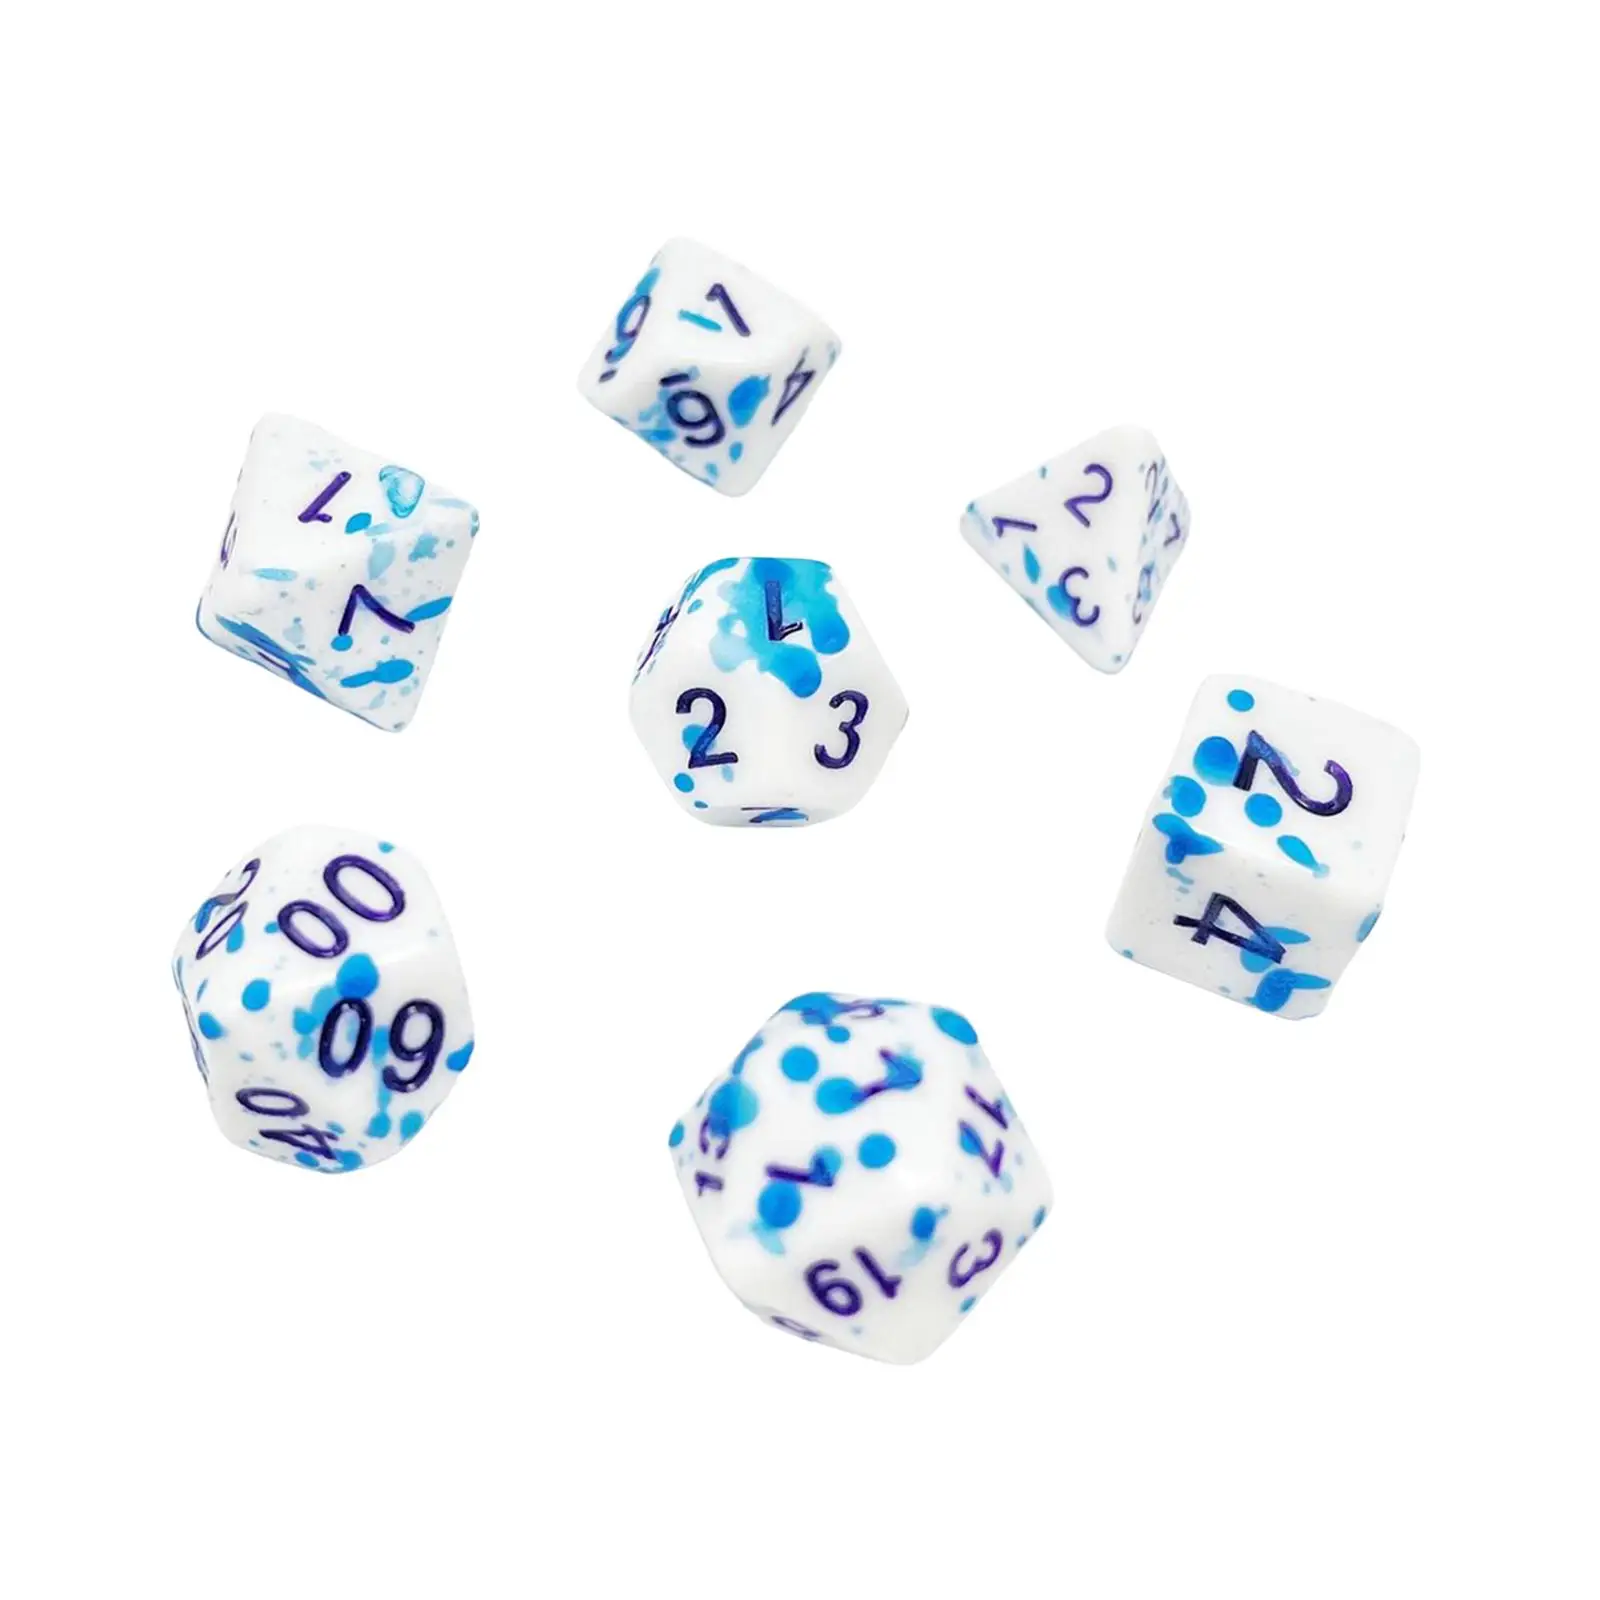 7 Pieces Multisided Dice Party Accessories Handmade Board Game Family Gatherings Role Playing Polyhedral Dice Table Gaming Dice